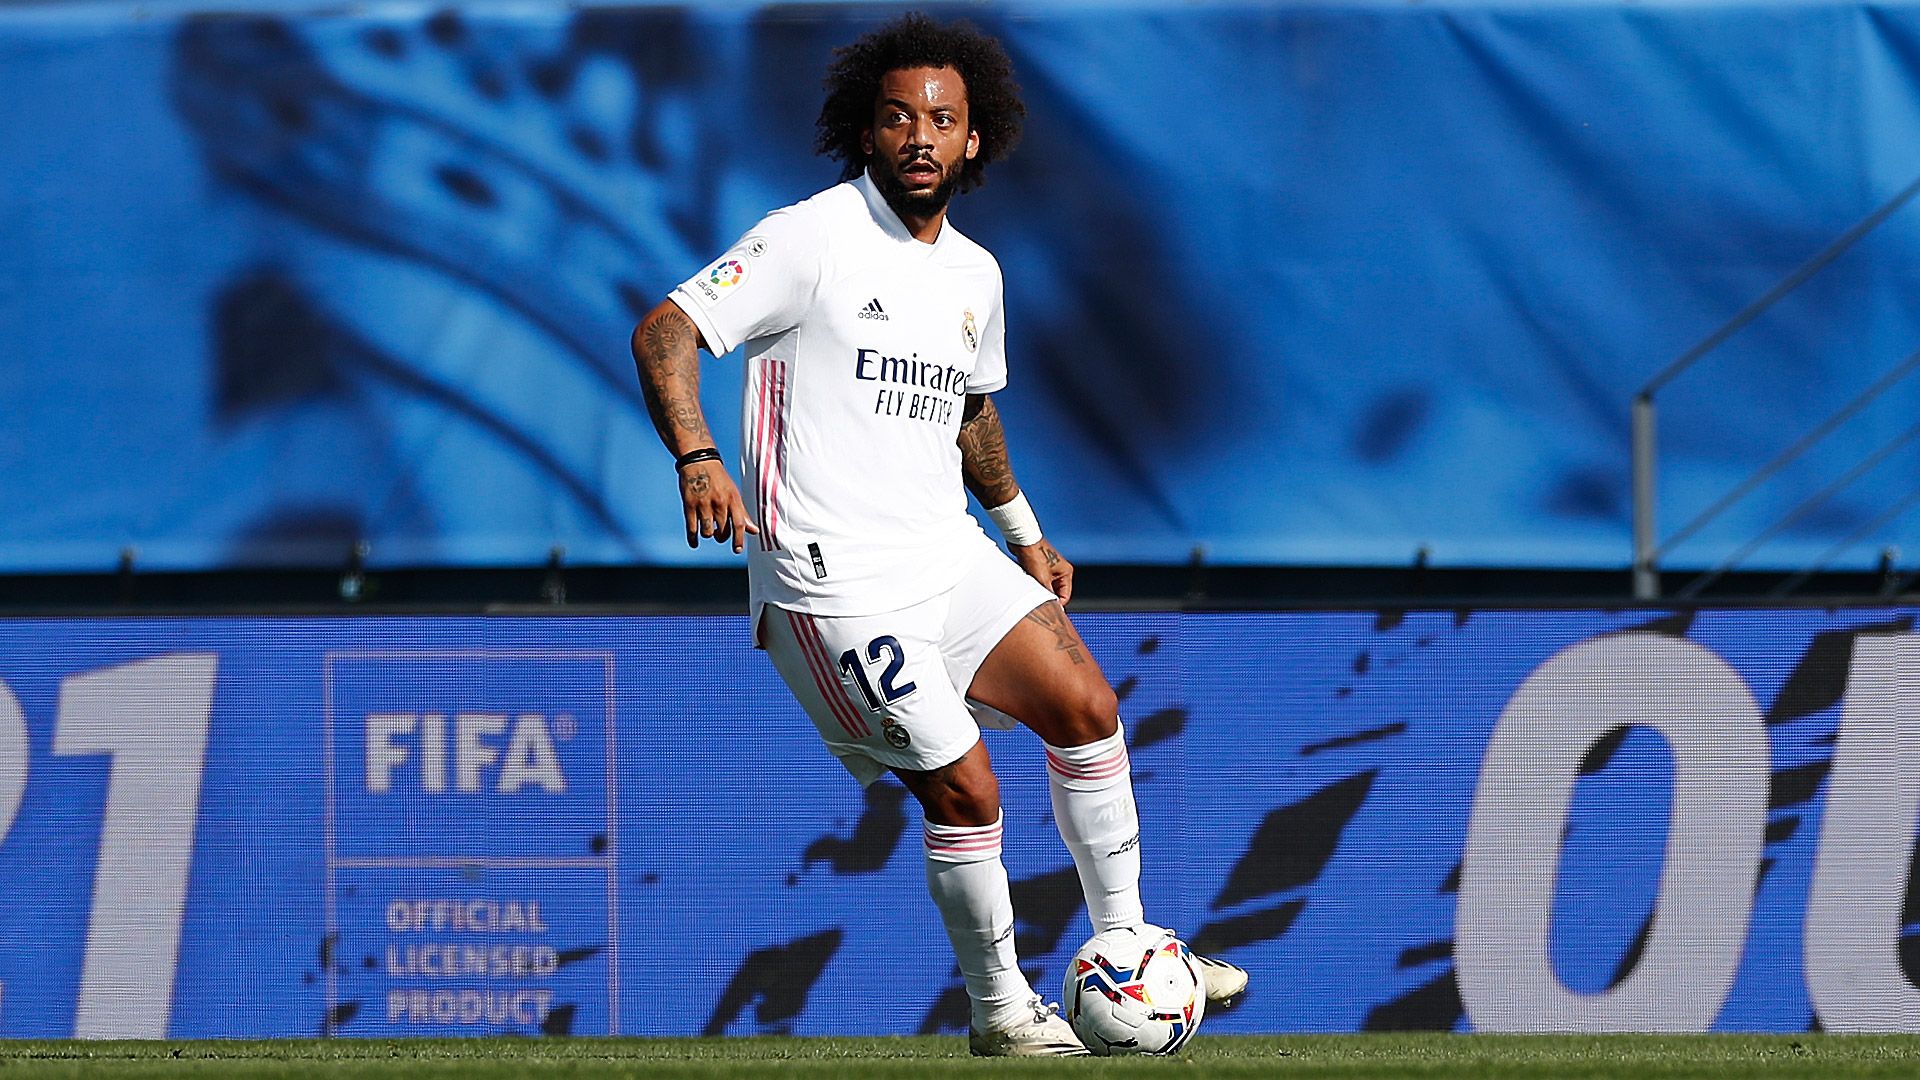 Fourteen years since Marcelo's Real Madrid debut. Real Madrid CF